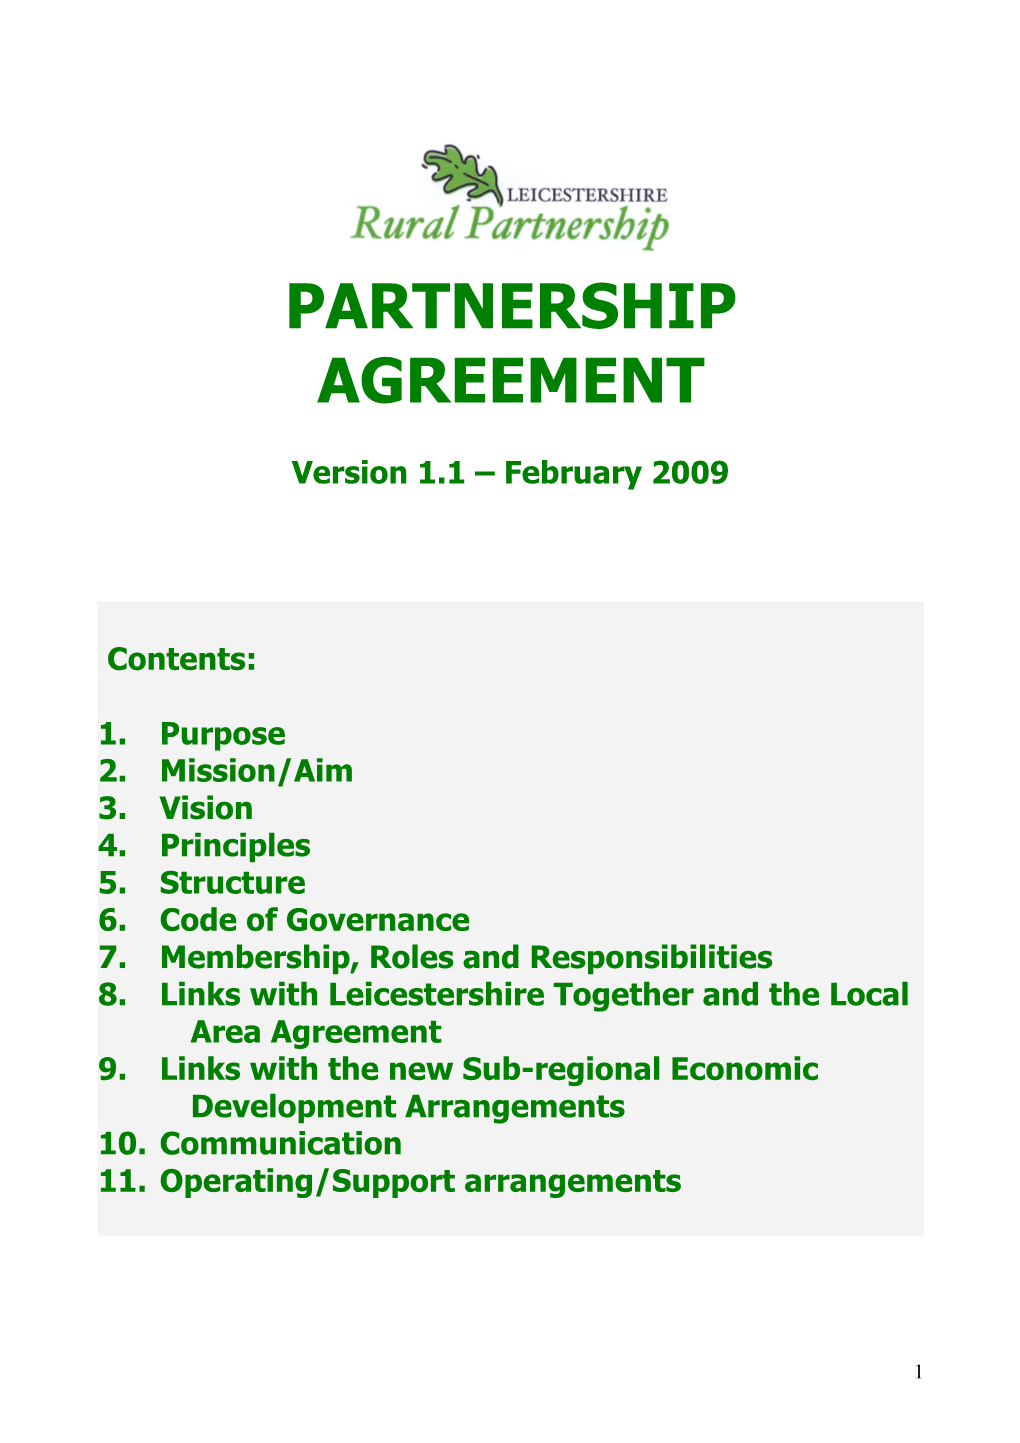 Developing the Sustainable Community Strategy and Local Area Agreement